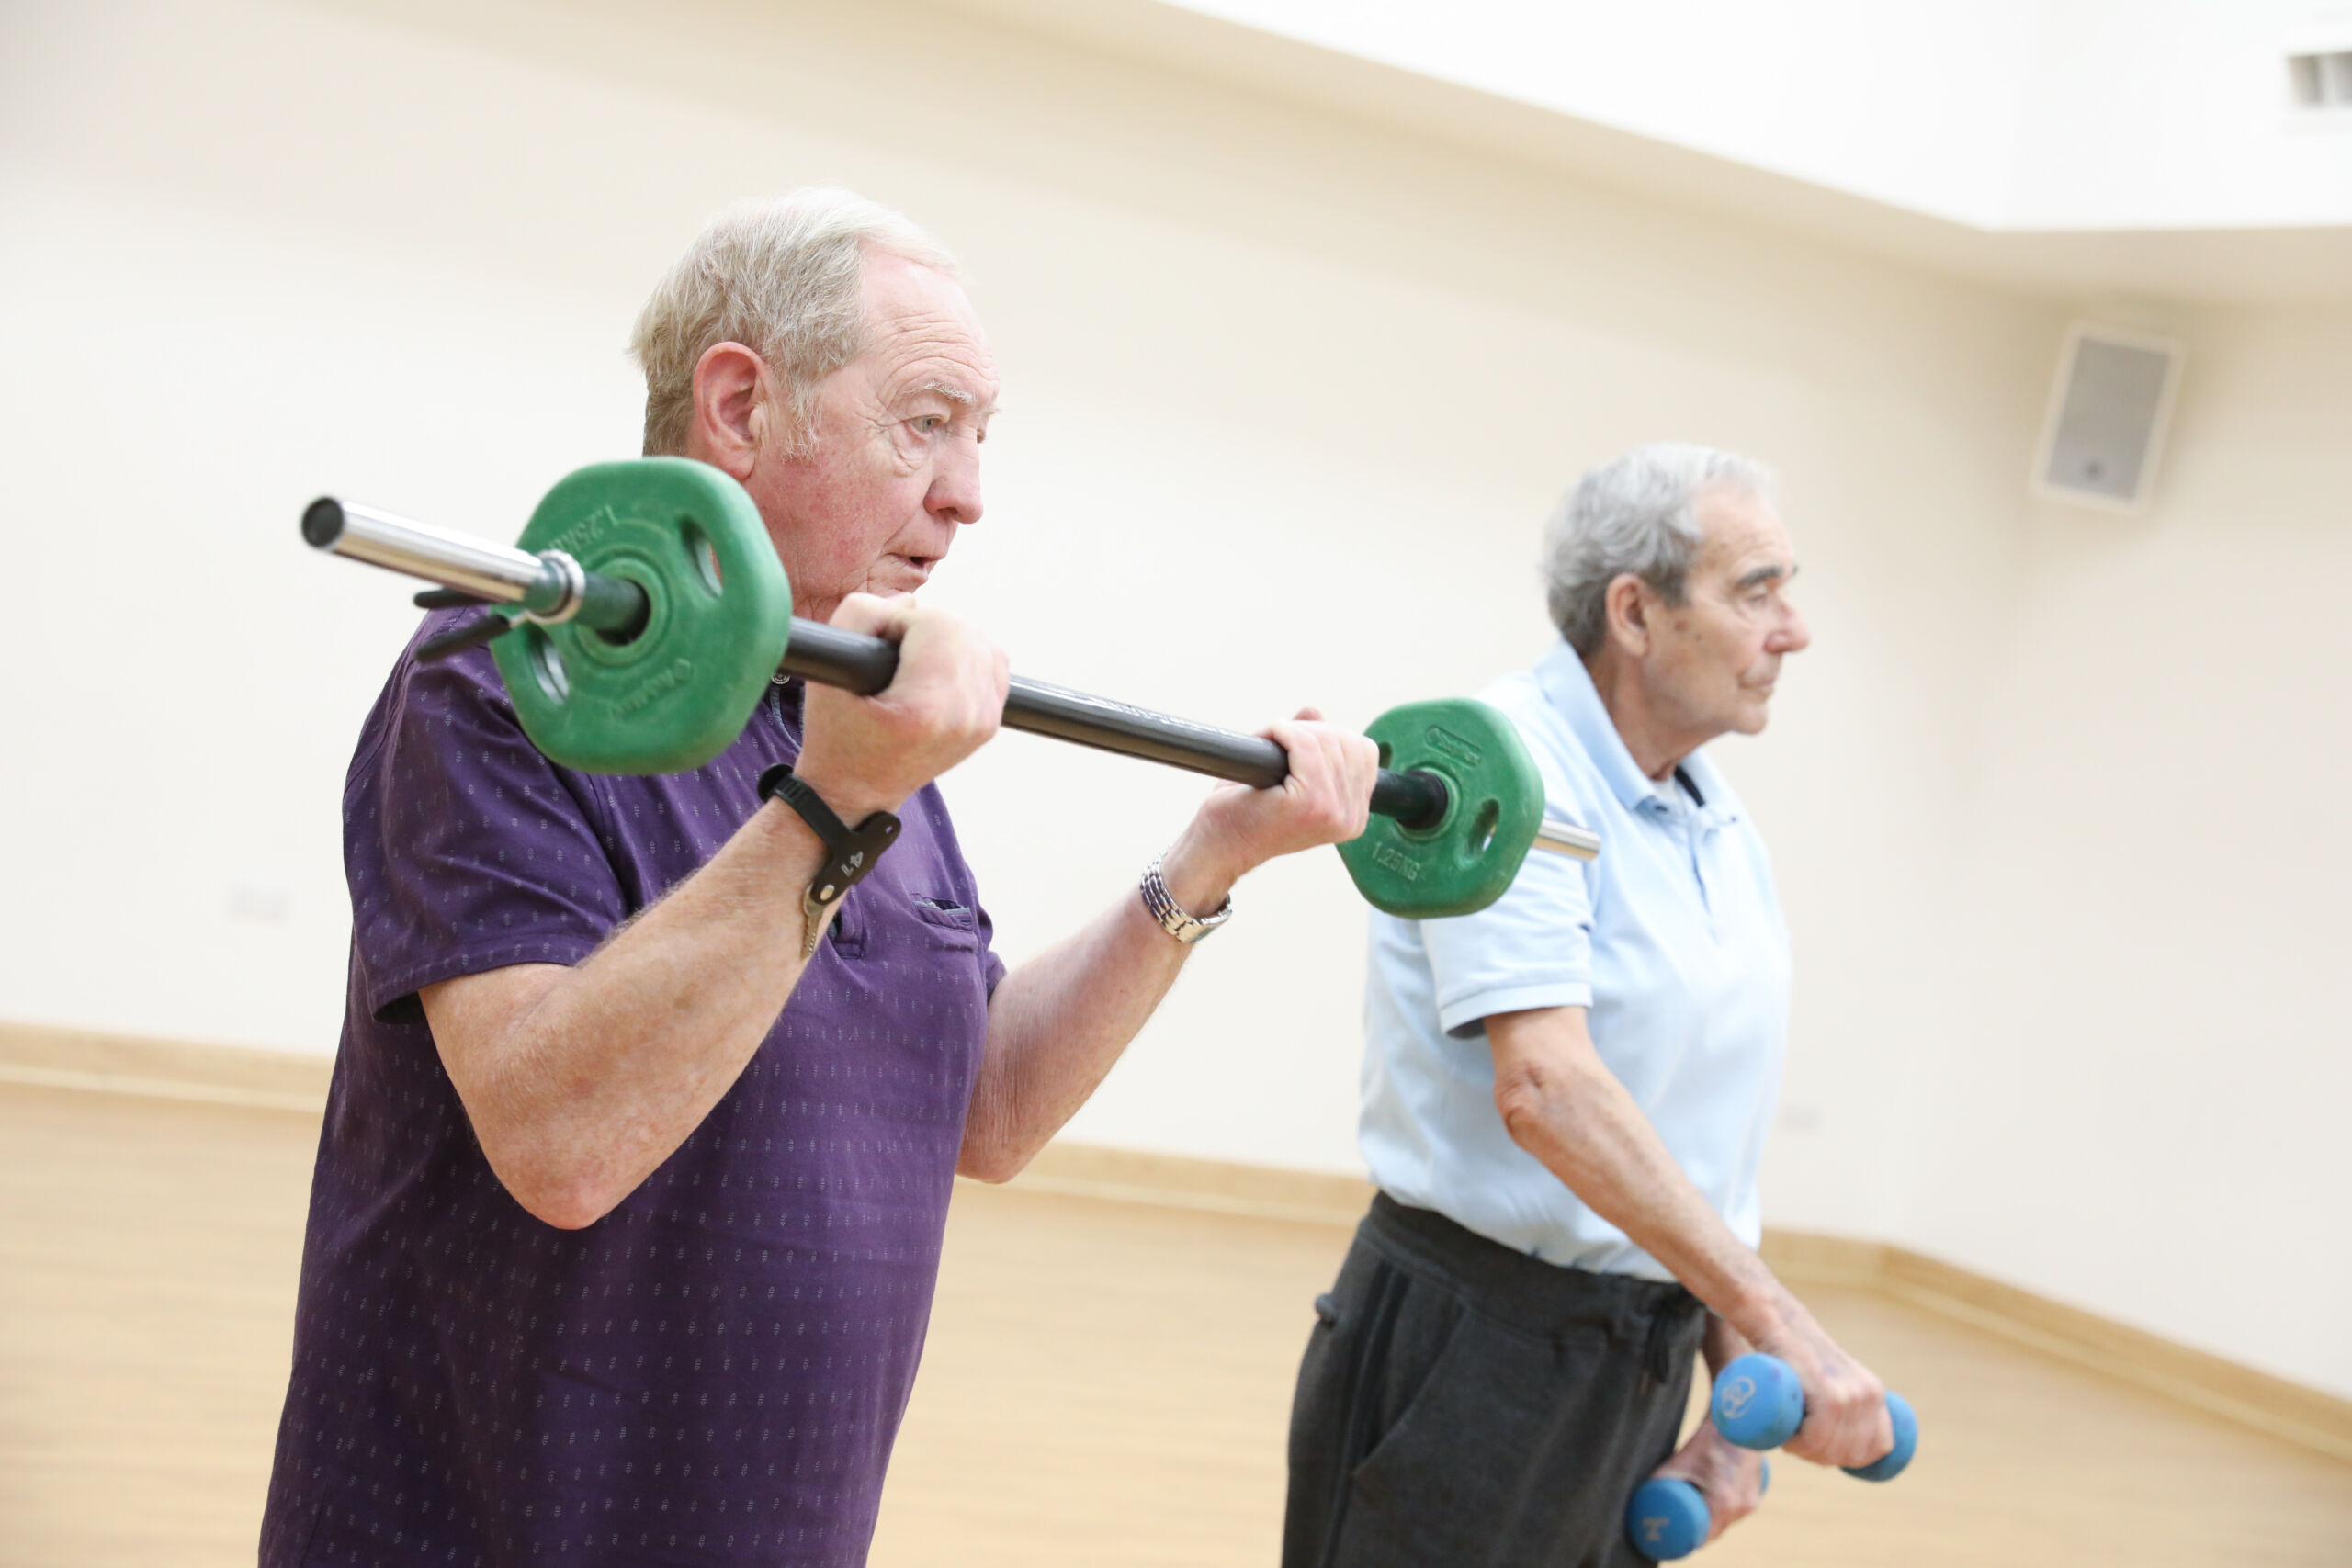 Two Prehab4Cancer participants in a gym using weights.